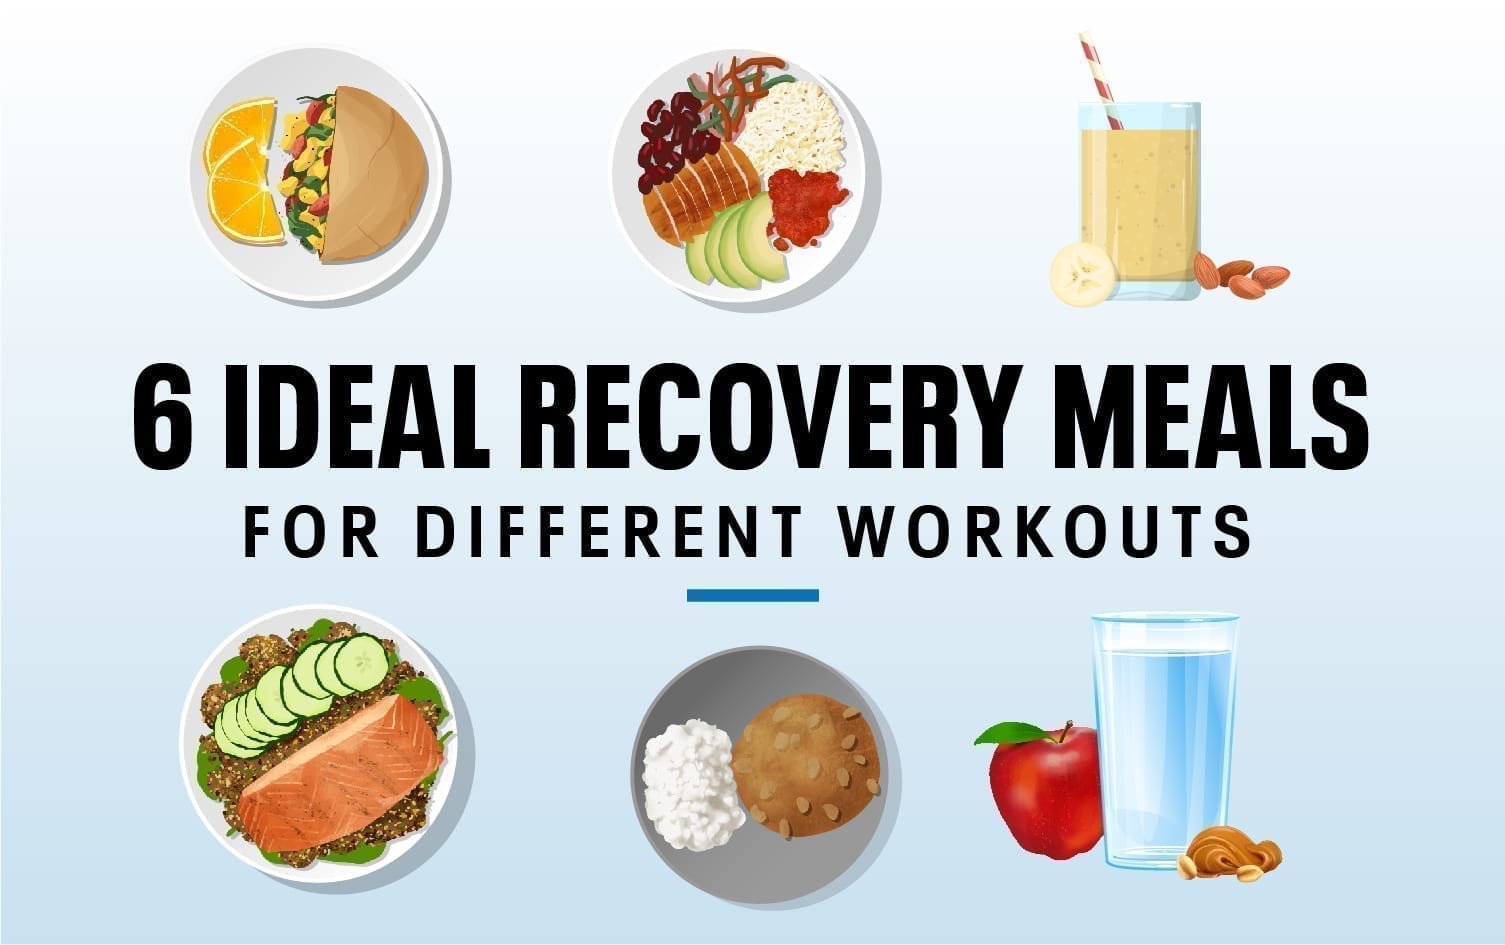 Balanced macros for recovery